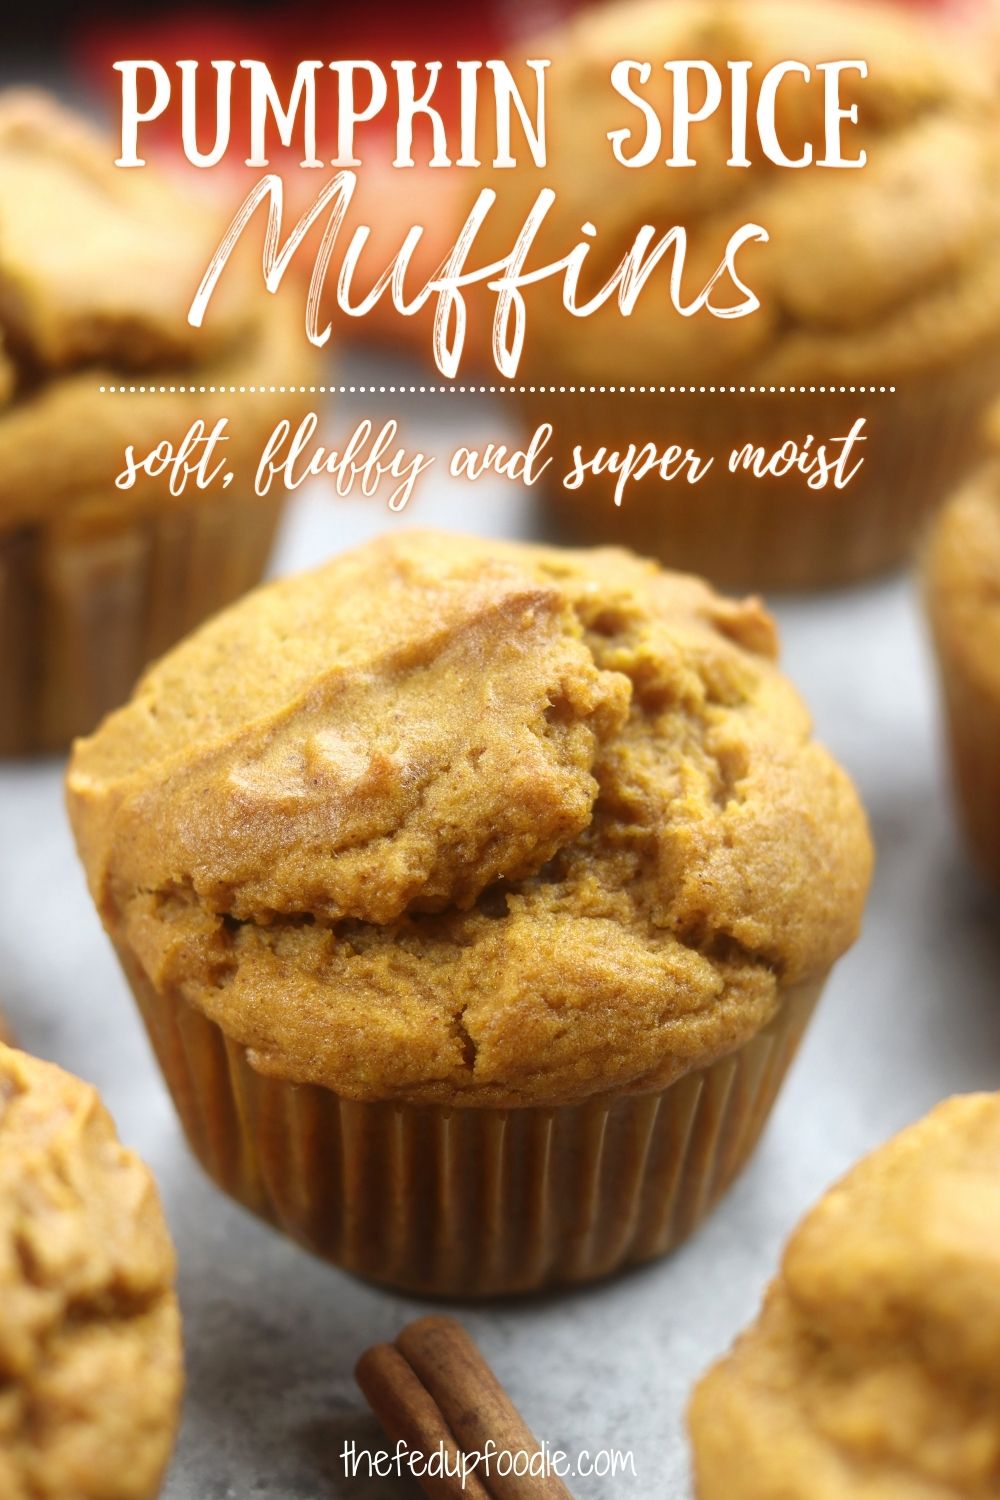 So completely heavenly, moist and fluffy, these Pumpkin Spice Muffins are healthy enough for breakfast and scrumptious enough for dessert. Very to make and they fill your home with an irresistible cozy aroma  that makes crisp fall days feel a little warmer. #PumpkinMuffins #PumpkinMuffinsEasy #PumpkinMuffinsRecipe